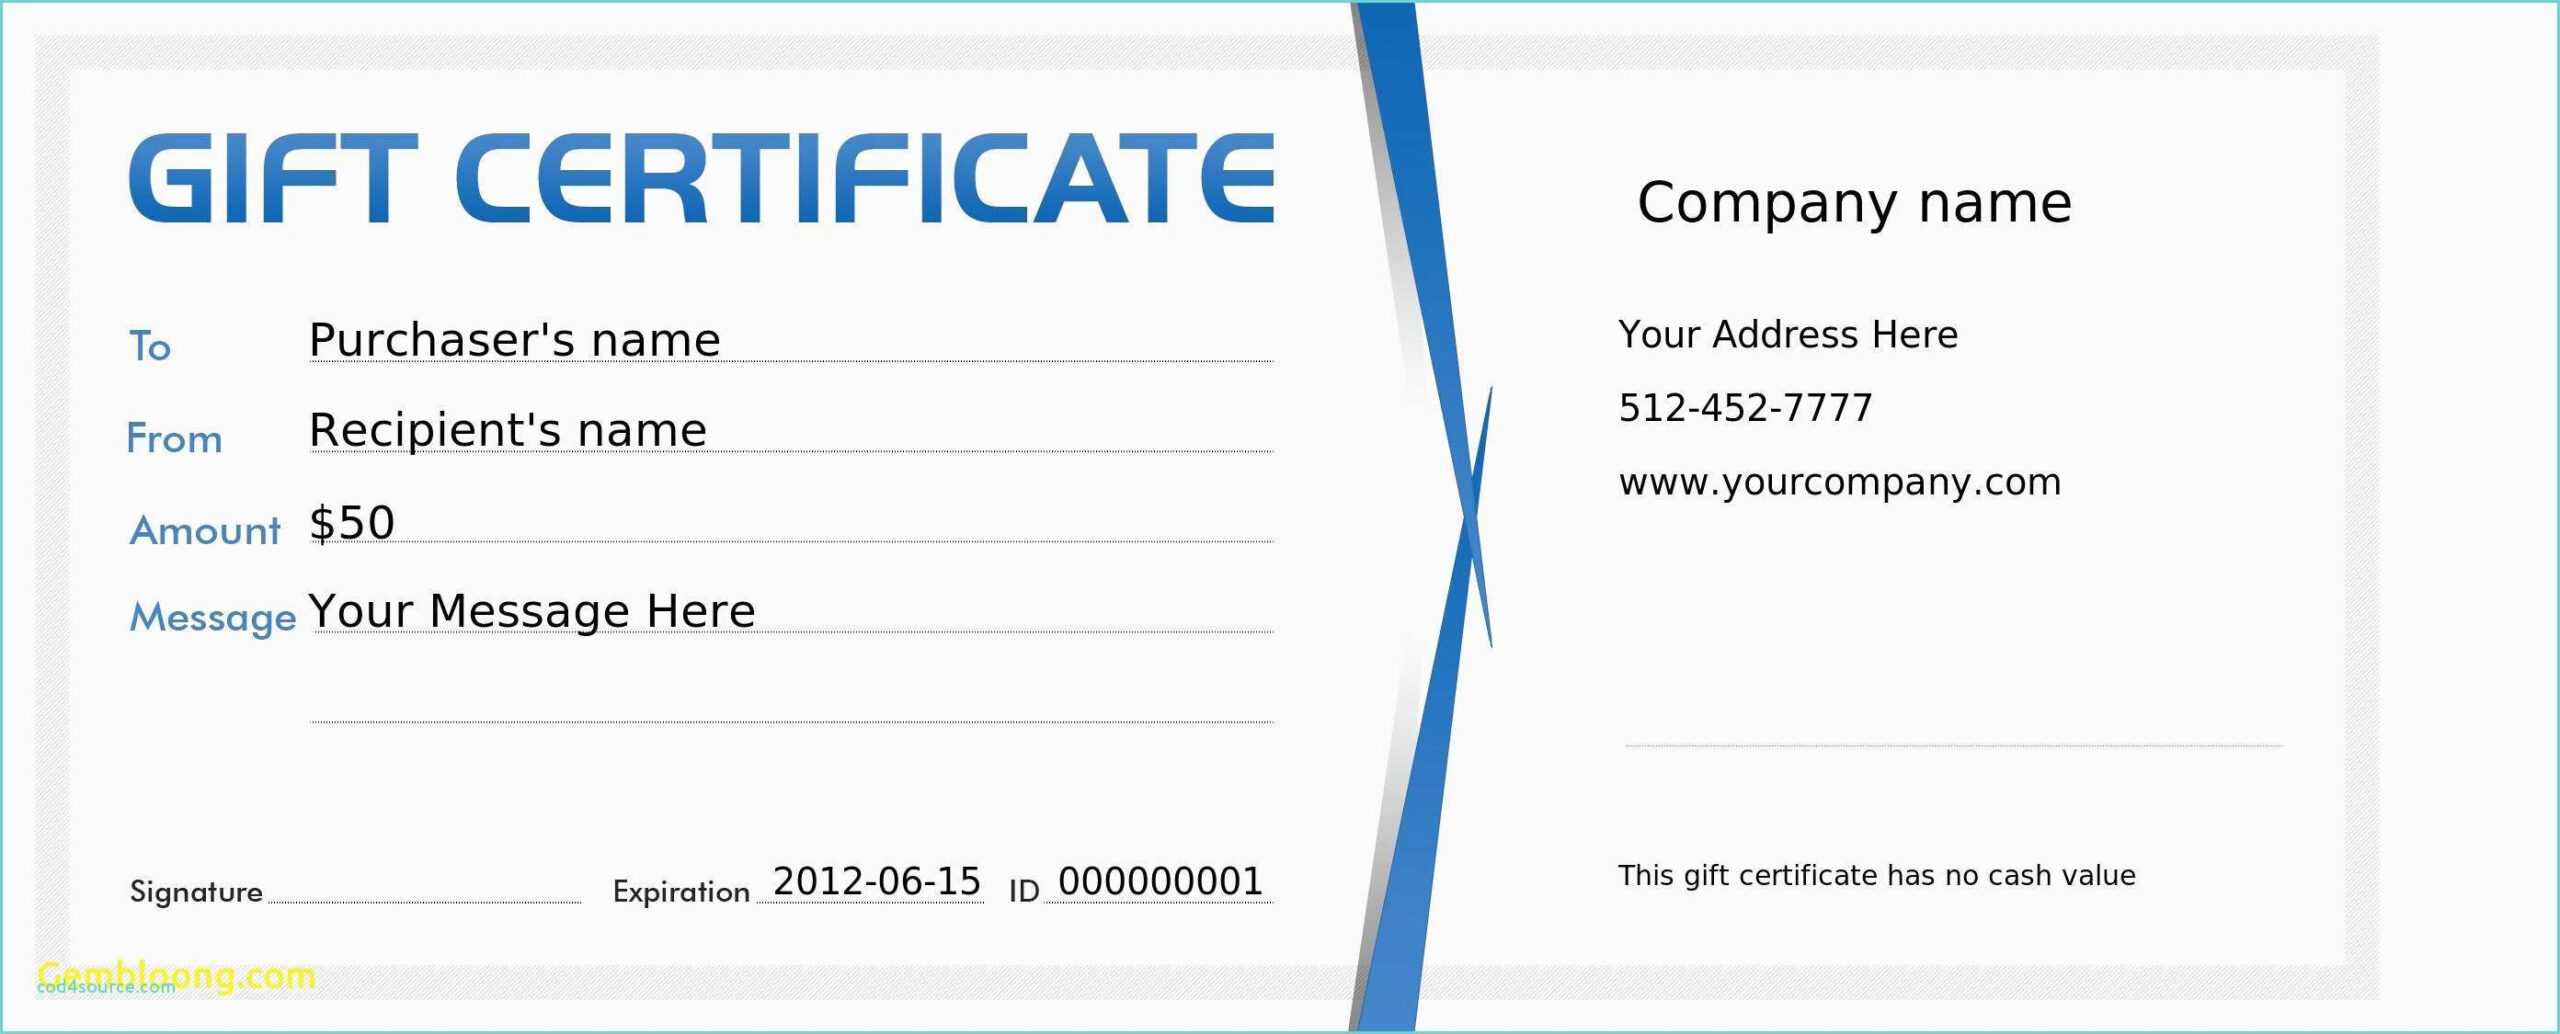 Gift Certificate Template Microsoft Publisher For Publisher Gift Certificate Template